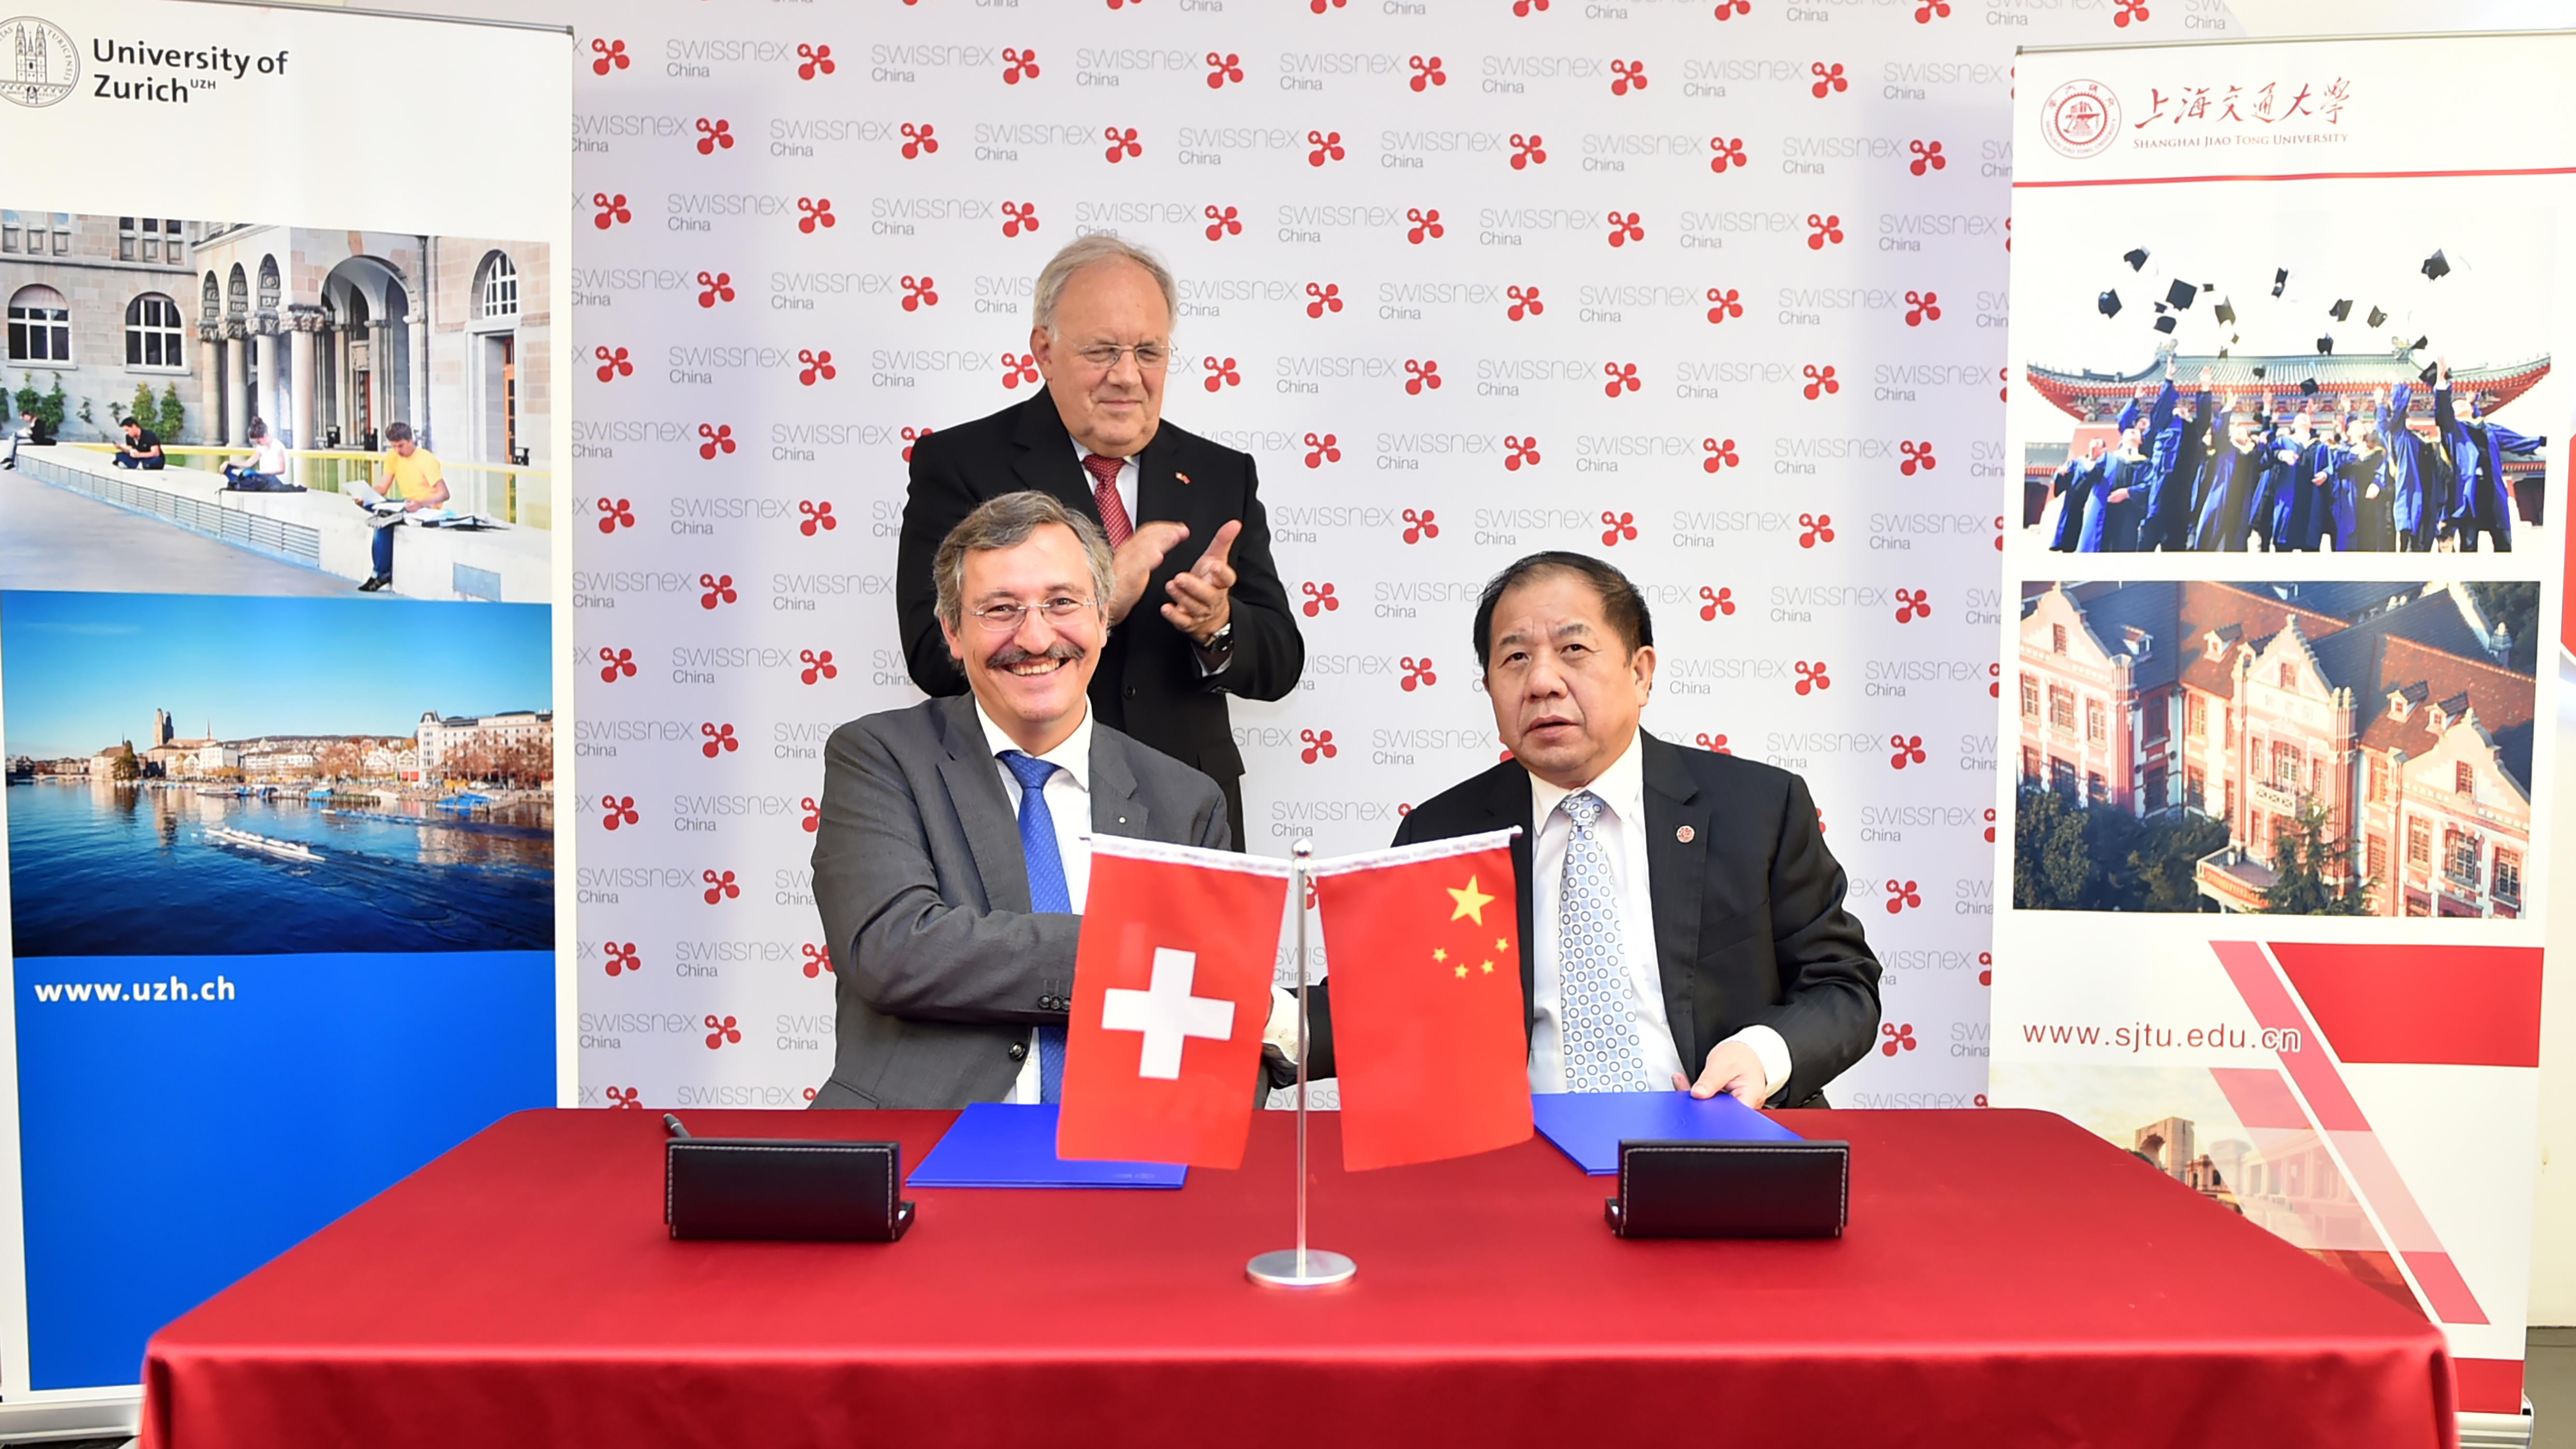 Fostering international relations was one of Michael Hengartner’s core goals in his time as president. Here he is pictured with Lin Zhongqin, president of Jiaotong University Shanghai (SJTU), signing an exchange agreement in September 2018. In the background is then federal councilor Johann Schneider-Ammann.